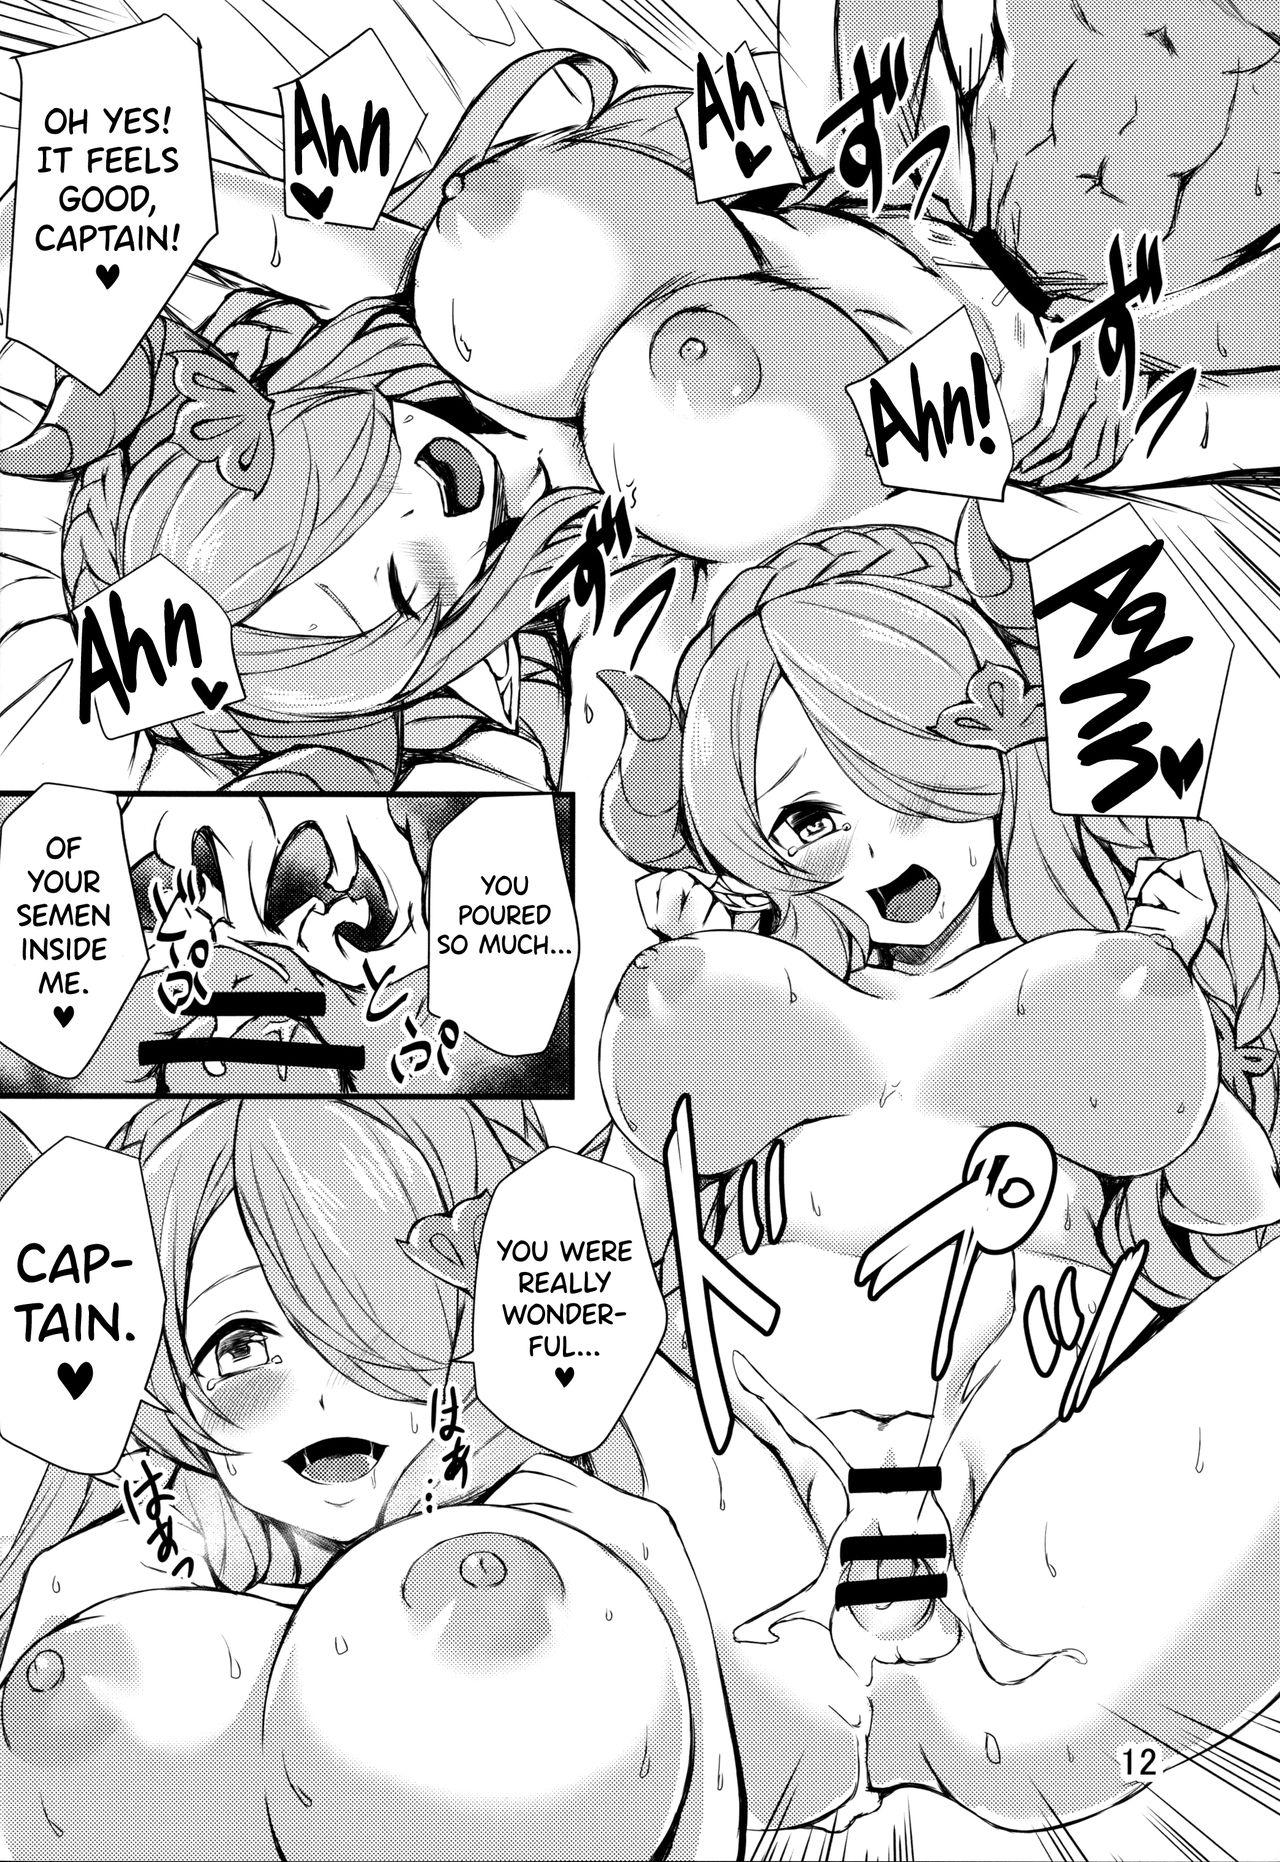 Short Hair Sleepless Night at the Female Draph's Room - Granblue fantasy Shemale Sex - Page 11